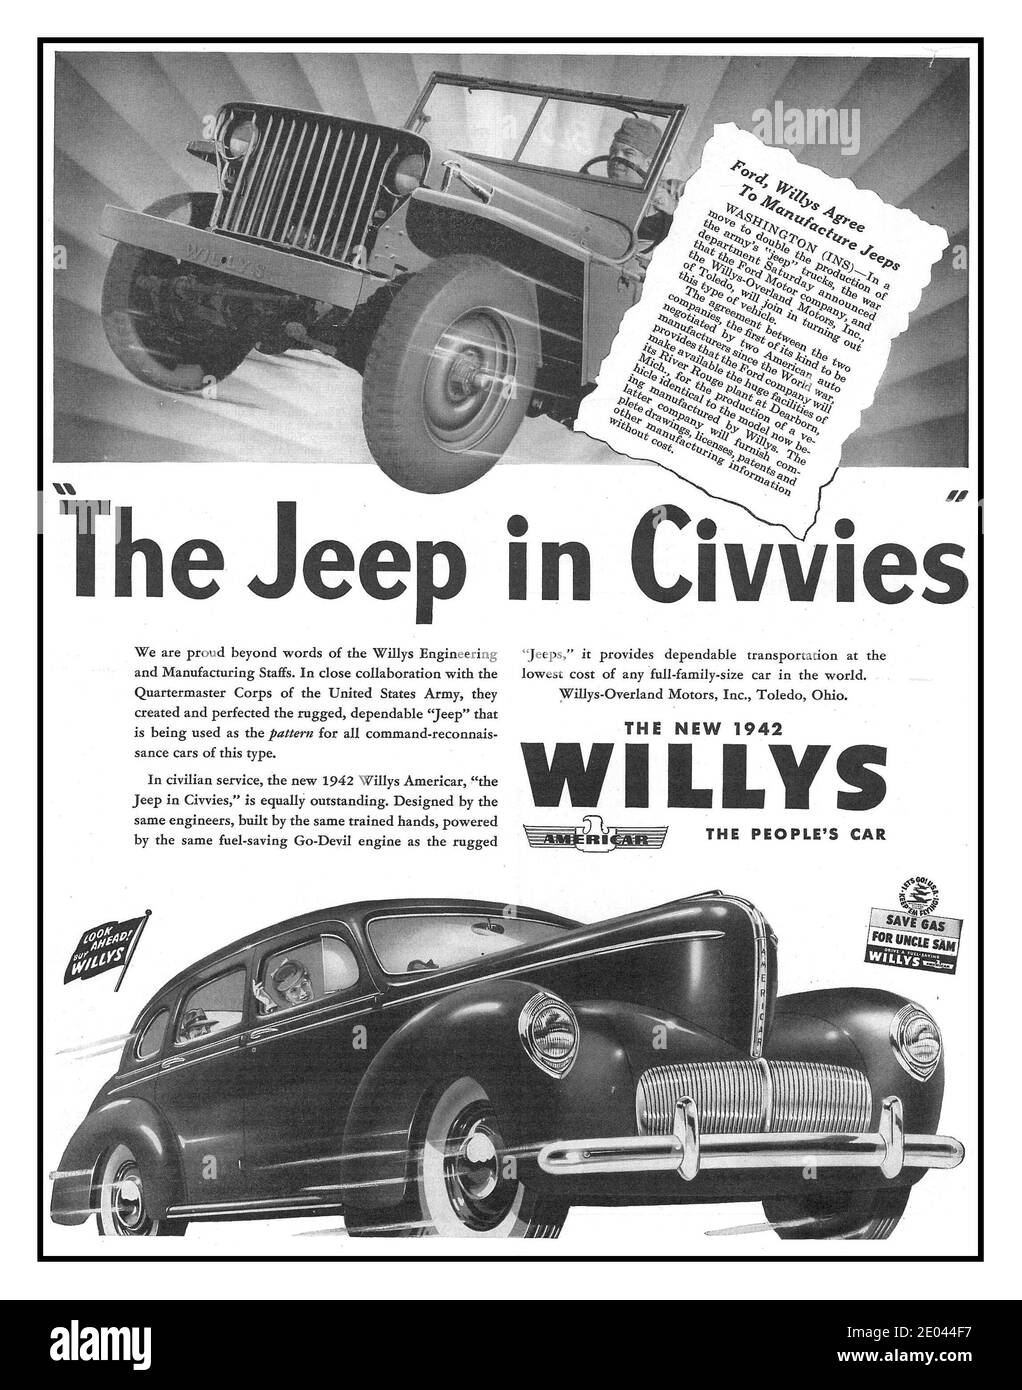 WILLYS JEEP WW2 Advertising 1942 The new Willys Saloon People’s car  “The Jeep in Civies” World War II American car advertising wartime 1940’s Stock Photo